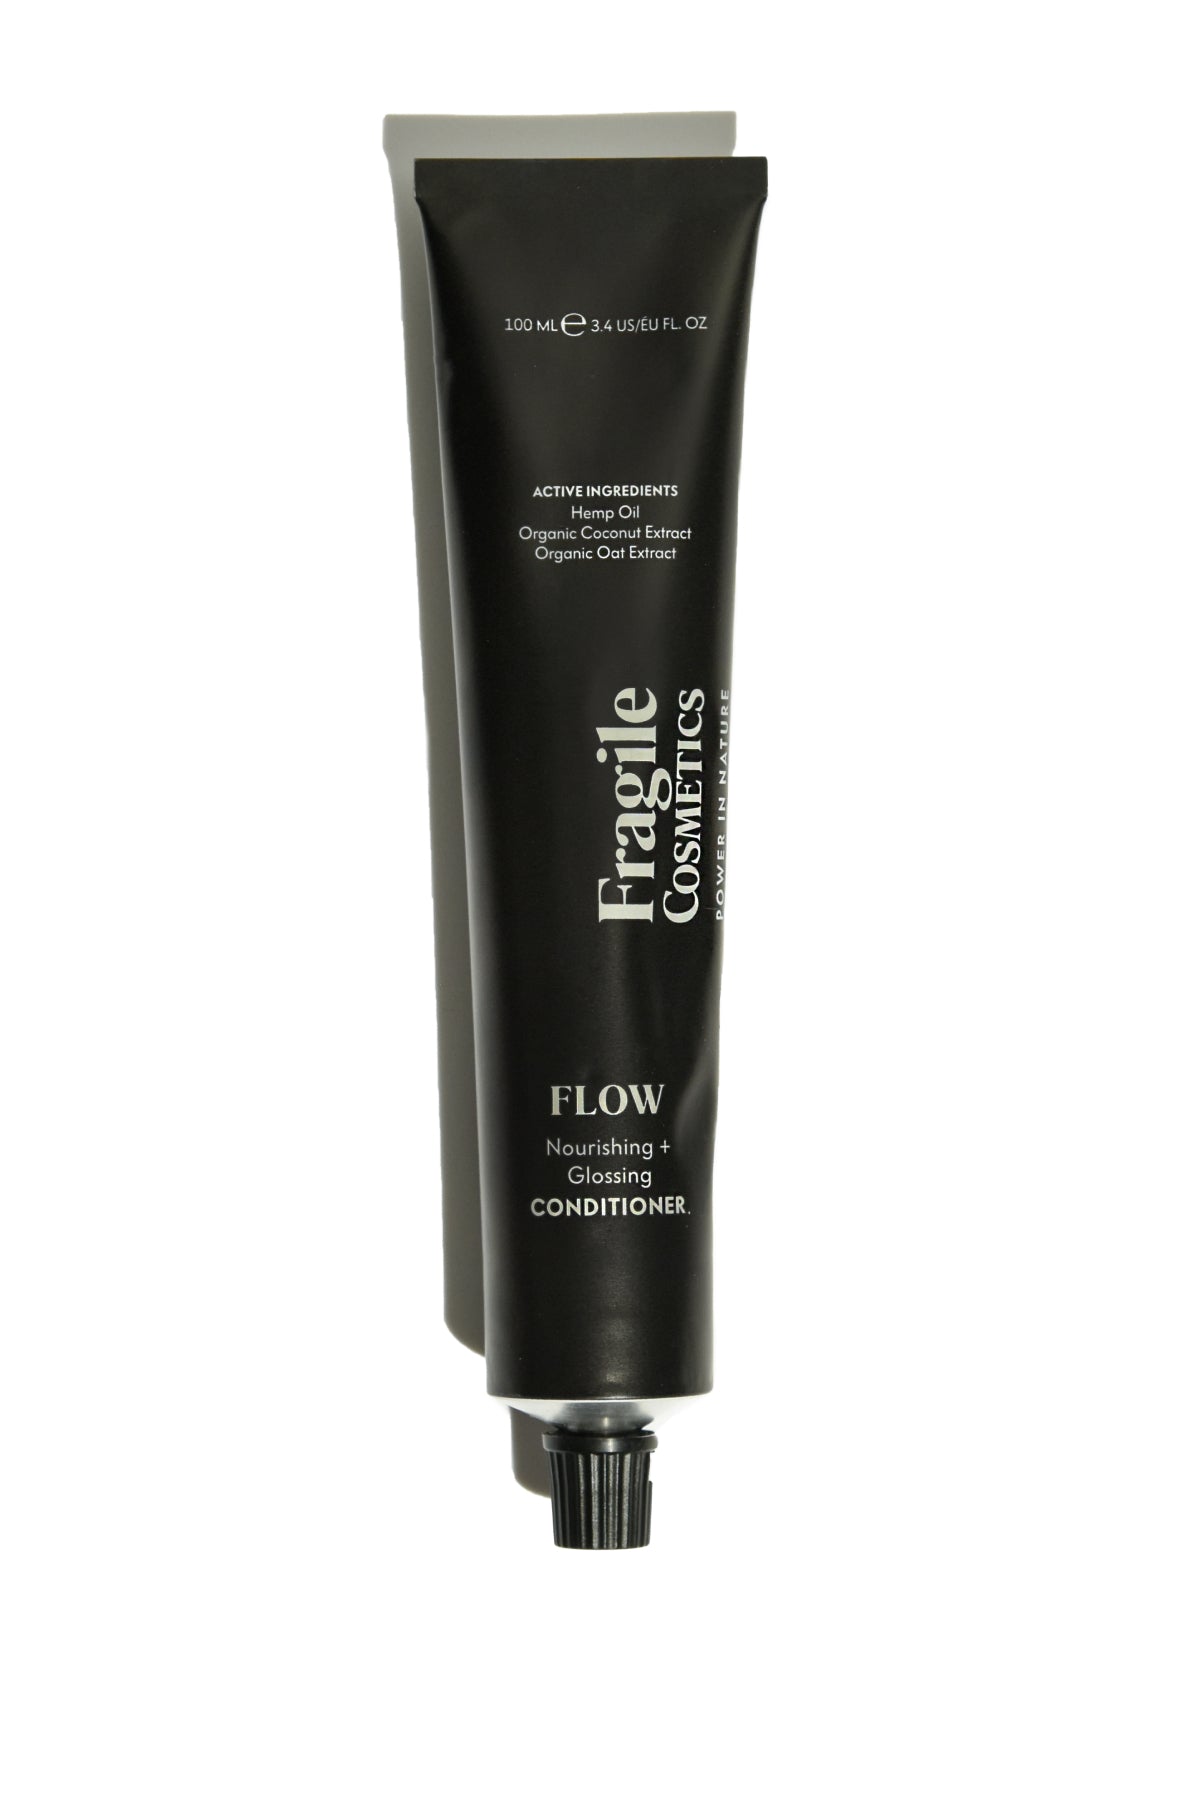 FLOW nourishing and smoothing conditioner